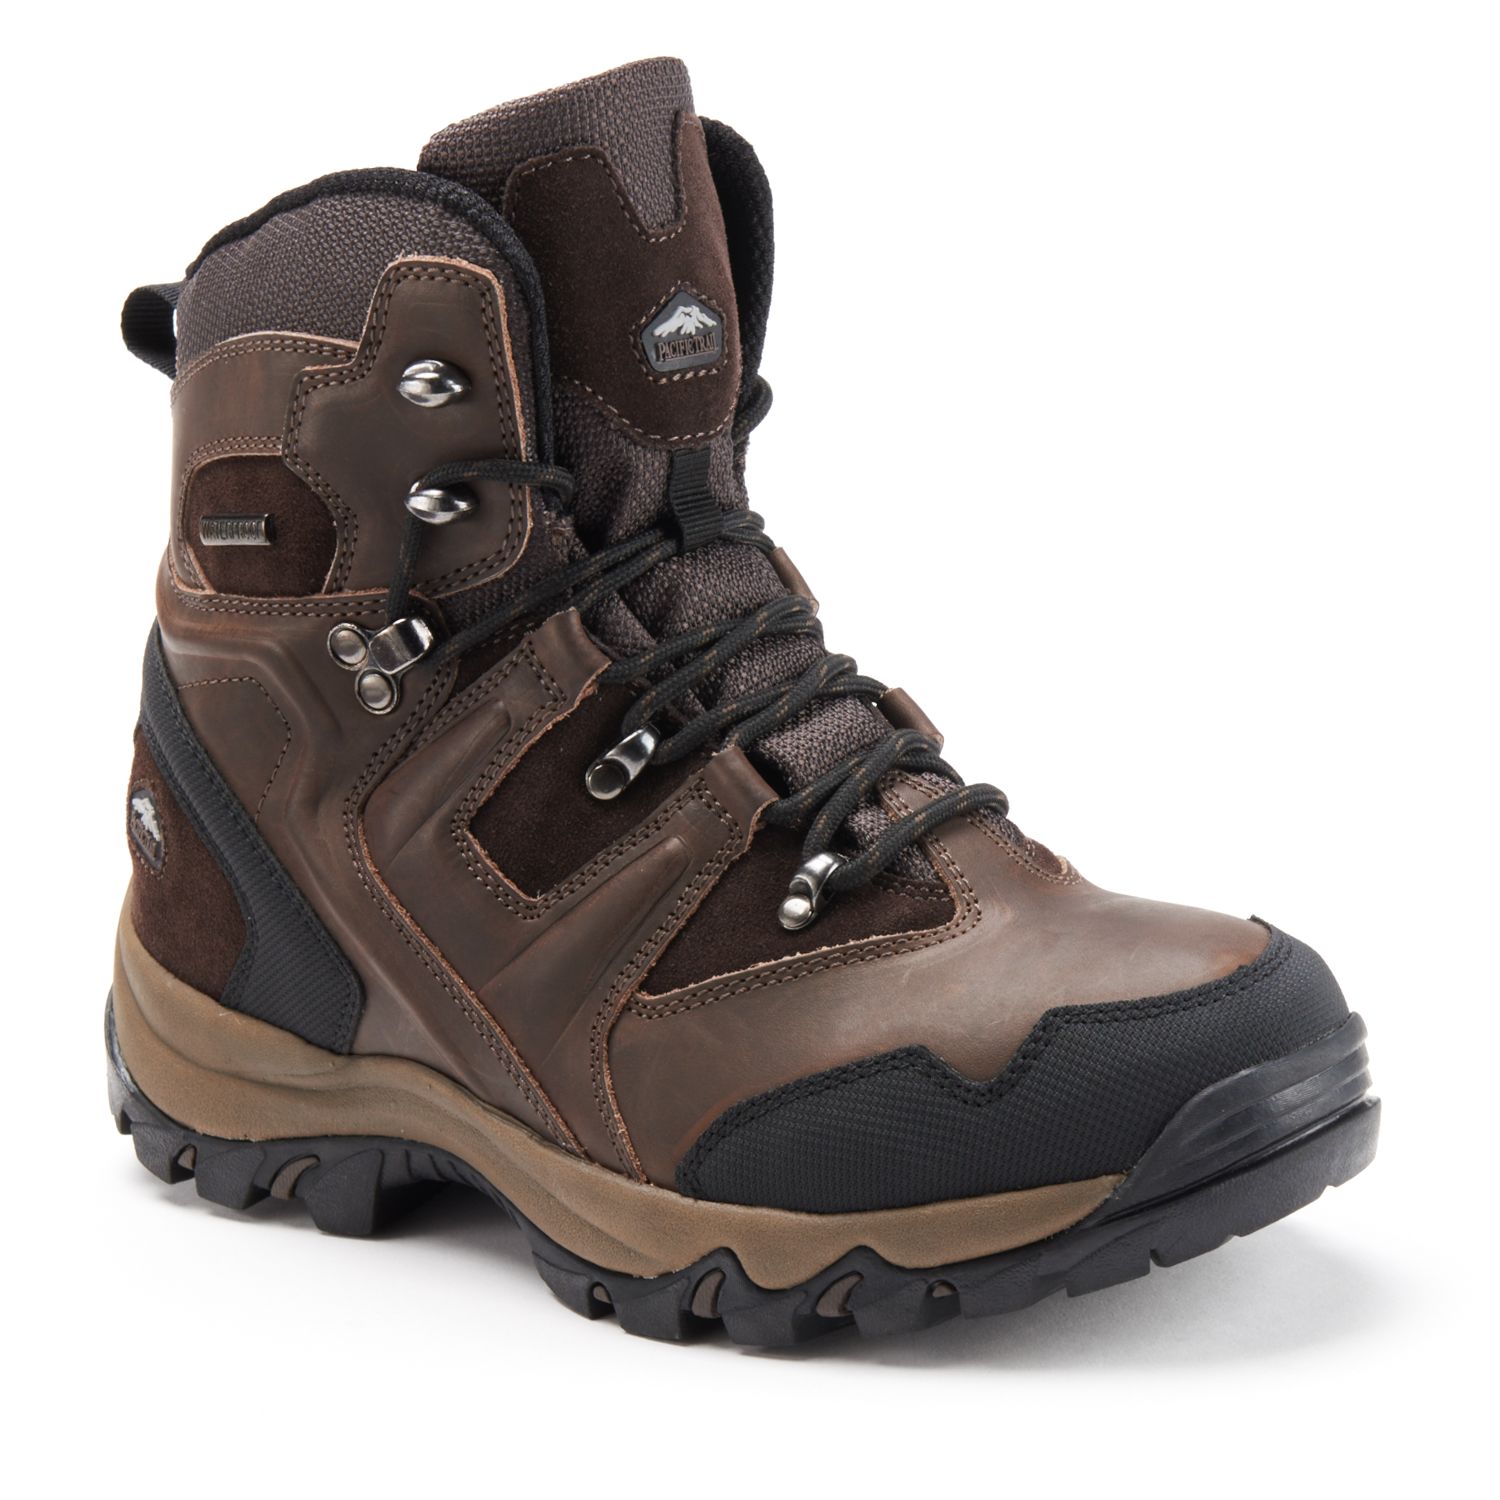 pacific trail waterproof boots